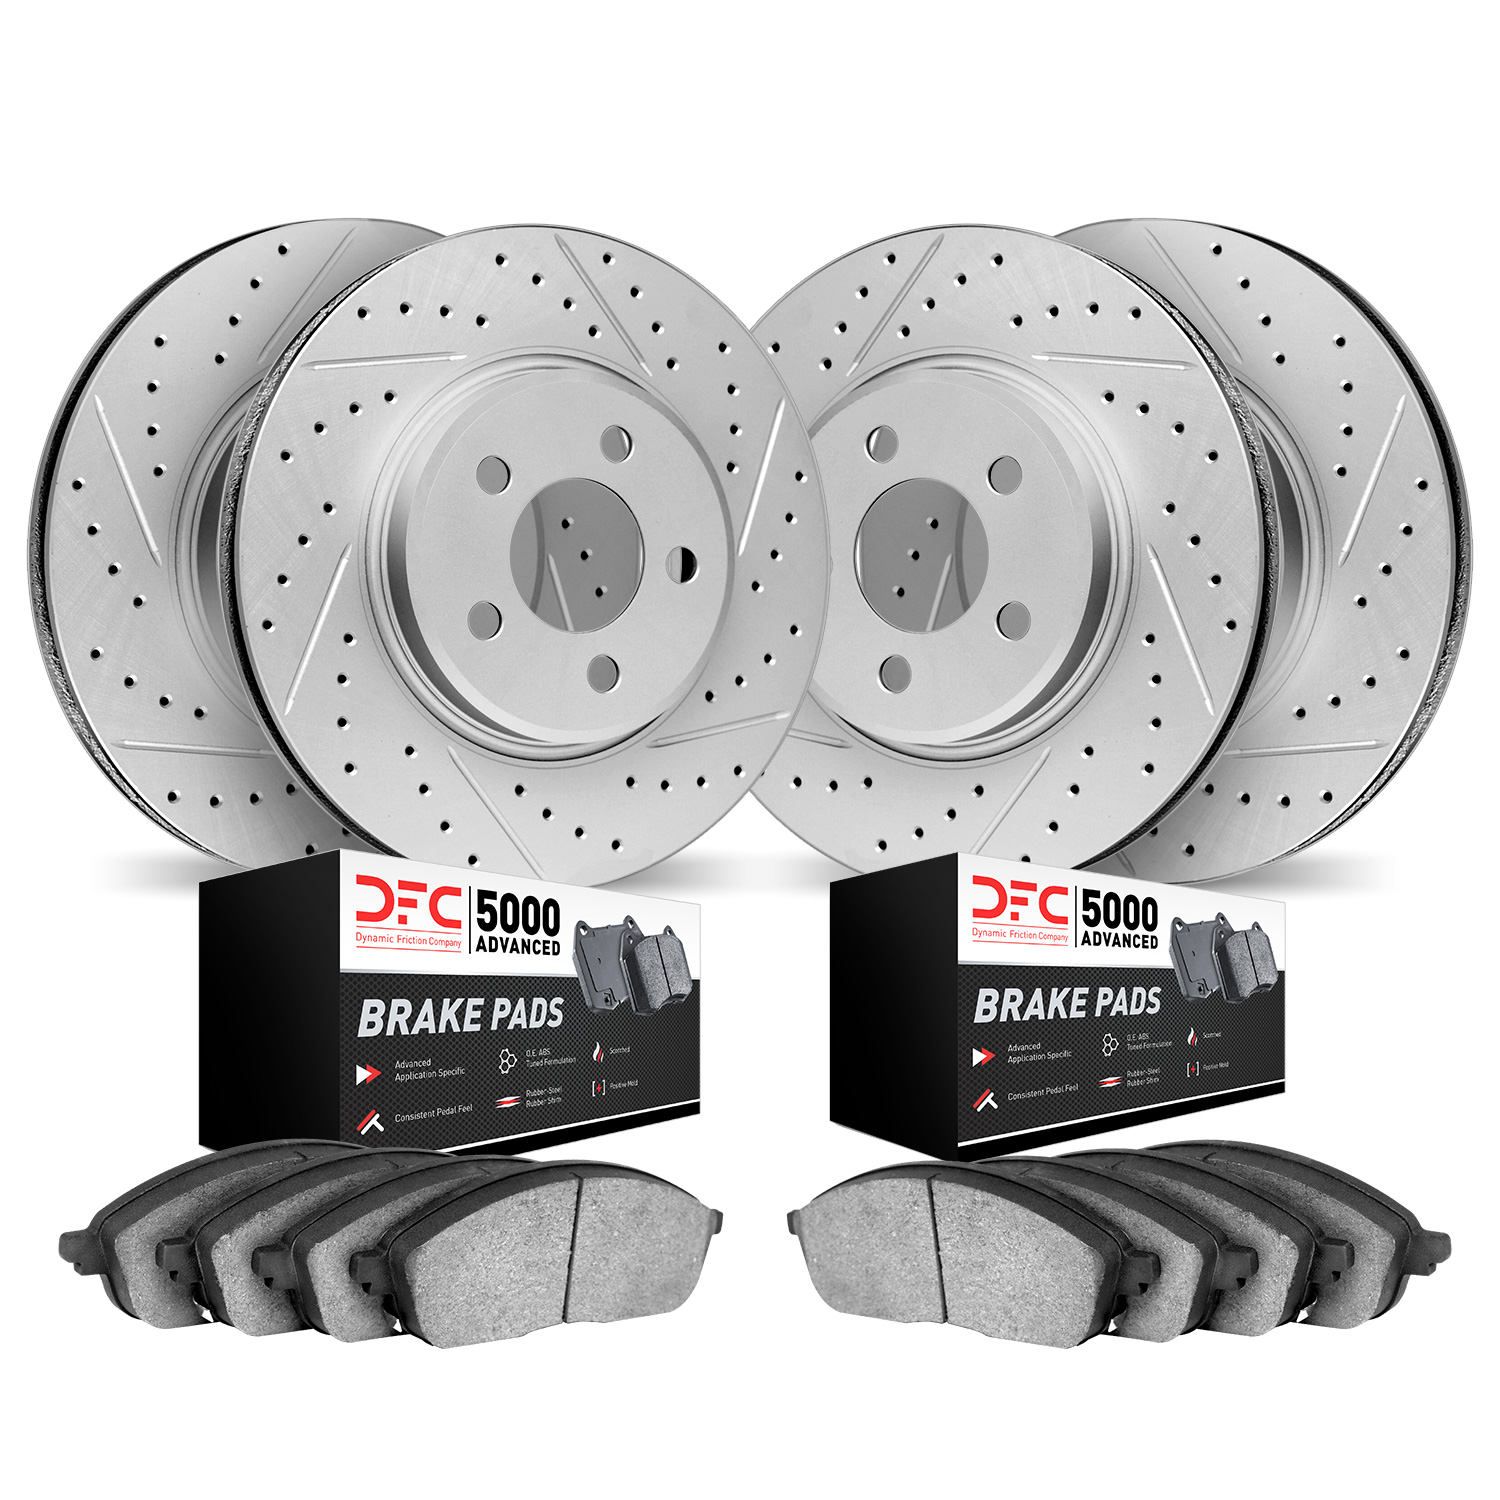 2504-31012 Geoperformance Drilled/Slotted Rotors w/5000 Advanced Brake Pads Kit, 2008-2010 BMW, Position: Front and Rear